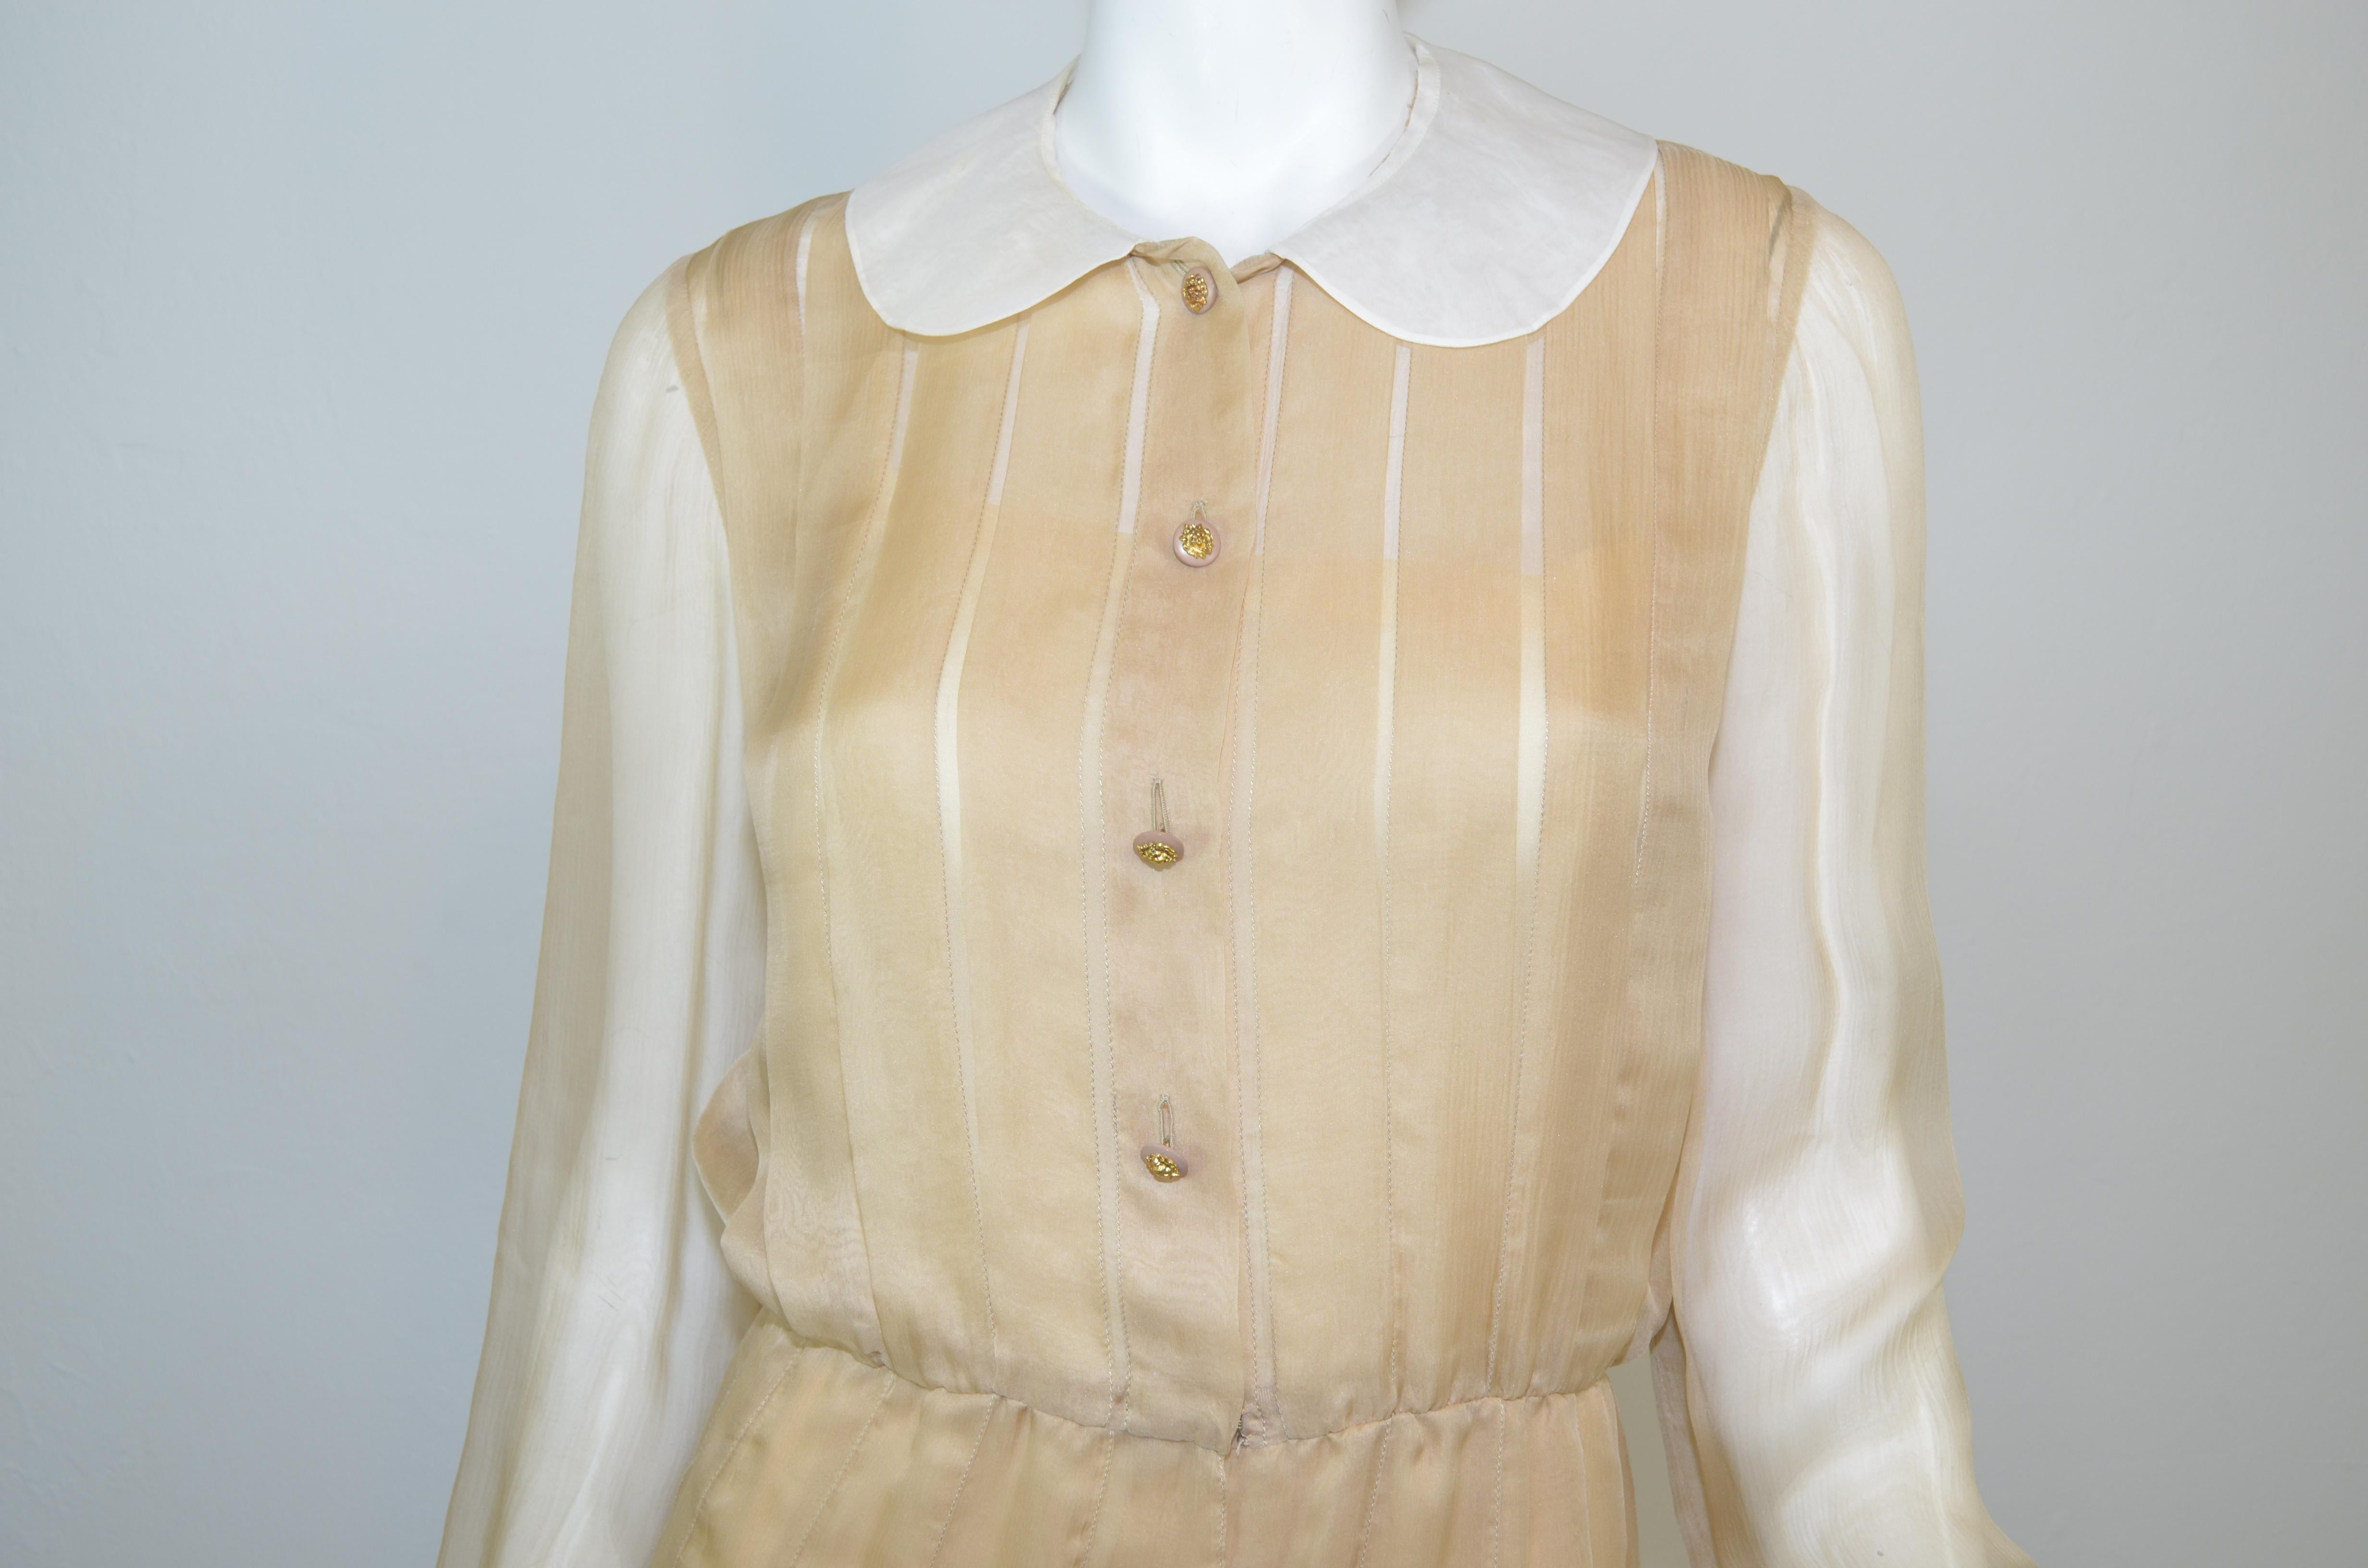 Chanel Boutique Vintage Iconic Silk Chiffon Pleated Dress In Good Condition For Sale In Carmel, CA